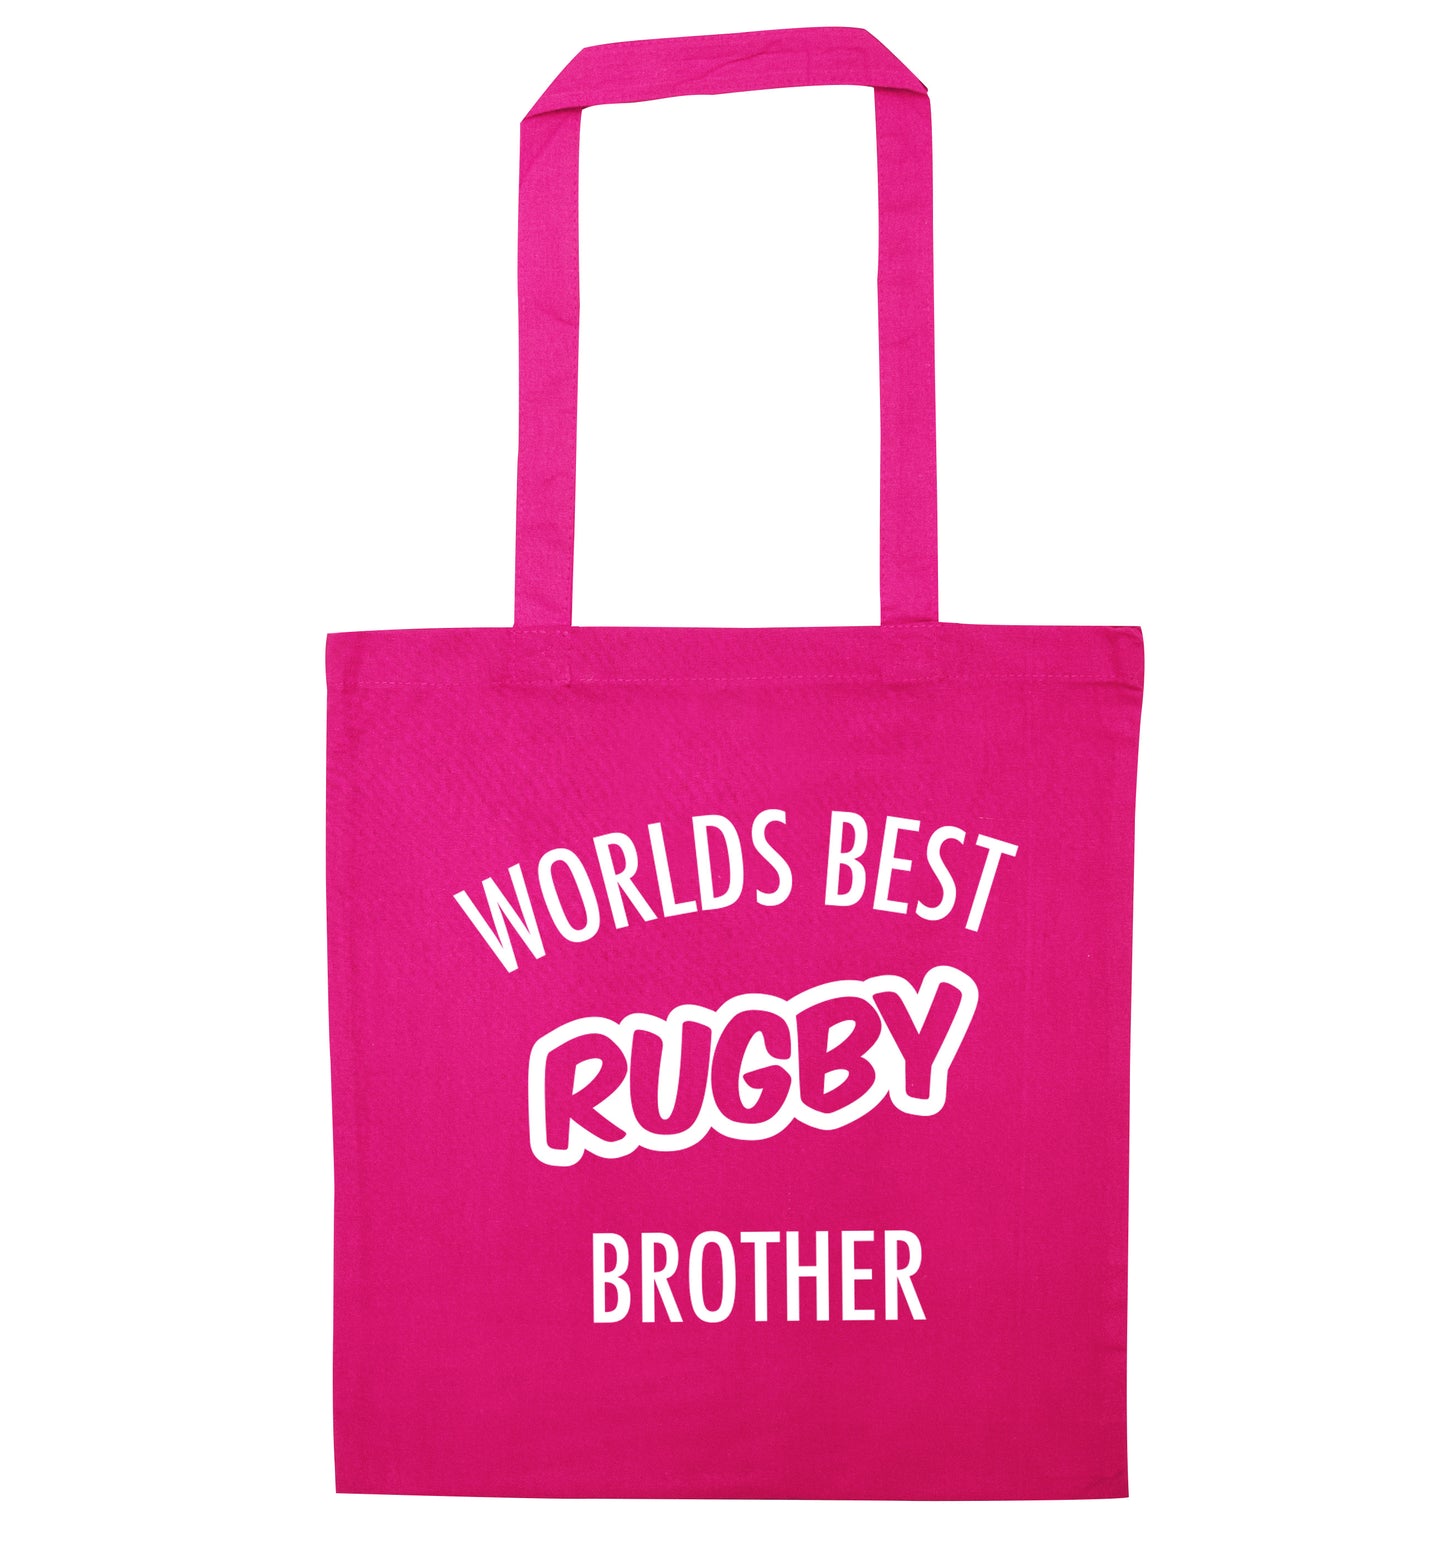 Worlds best rugby brother pink tote bag